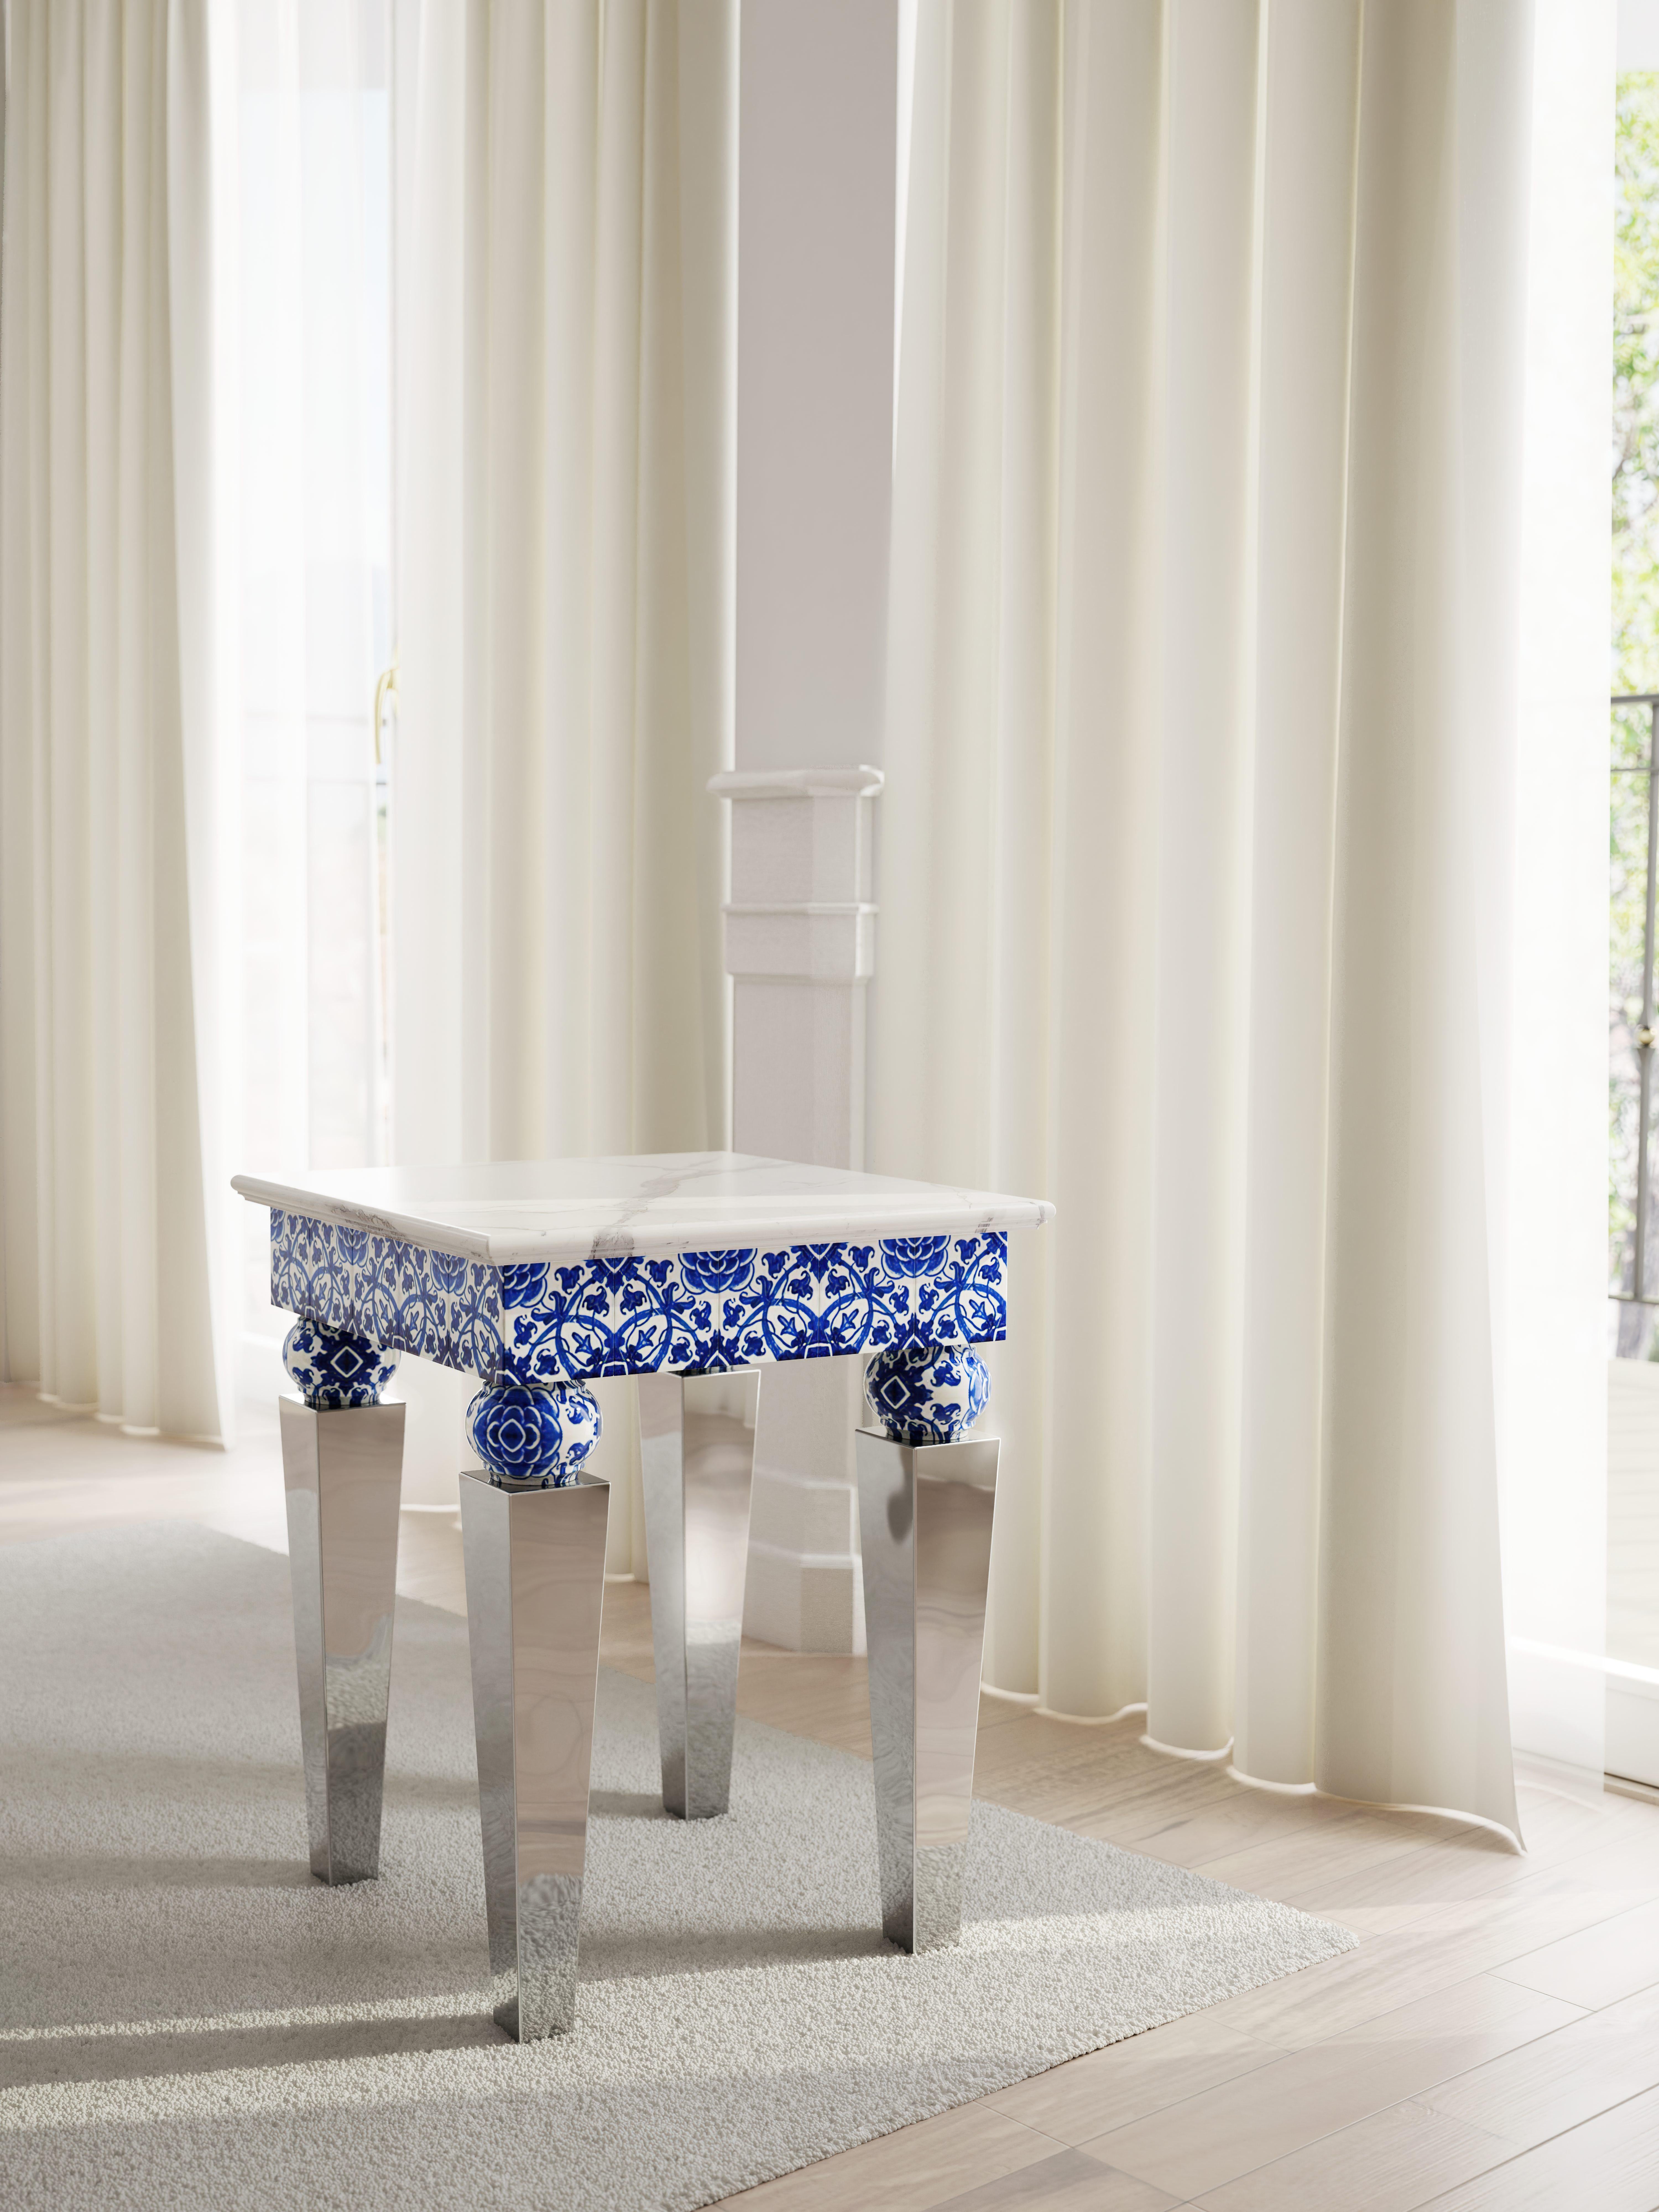 Modern Two Side Tables, White Marble, Mirror Steel, Blue Majolica Tiles, Also Outdoor For Sale